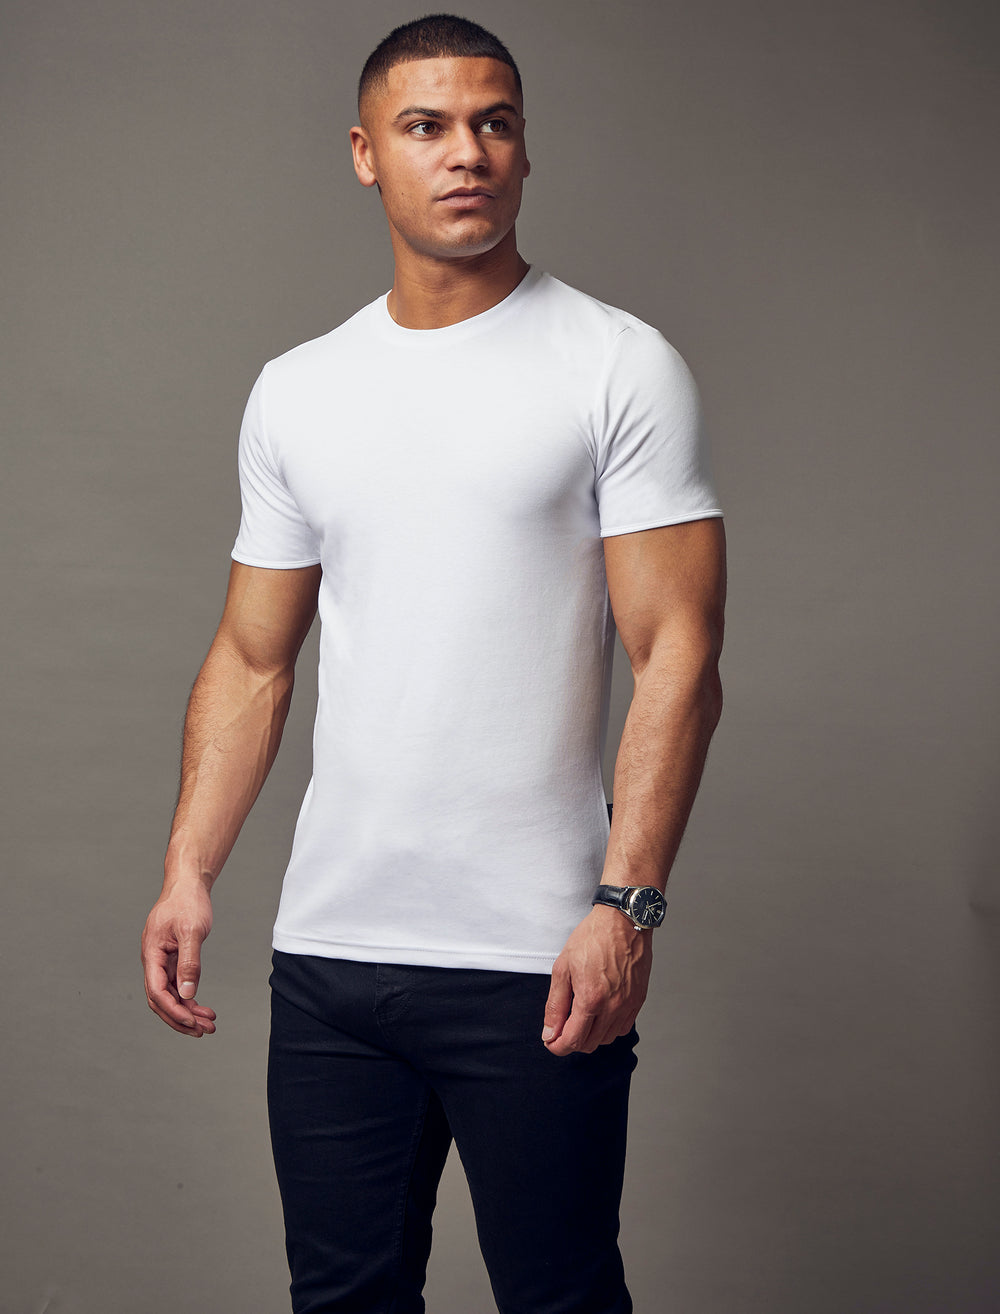 white muscle fit T-shirt, highlighting the tapered fit and premium quality offered by Tapered Menswear